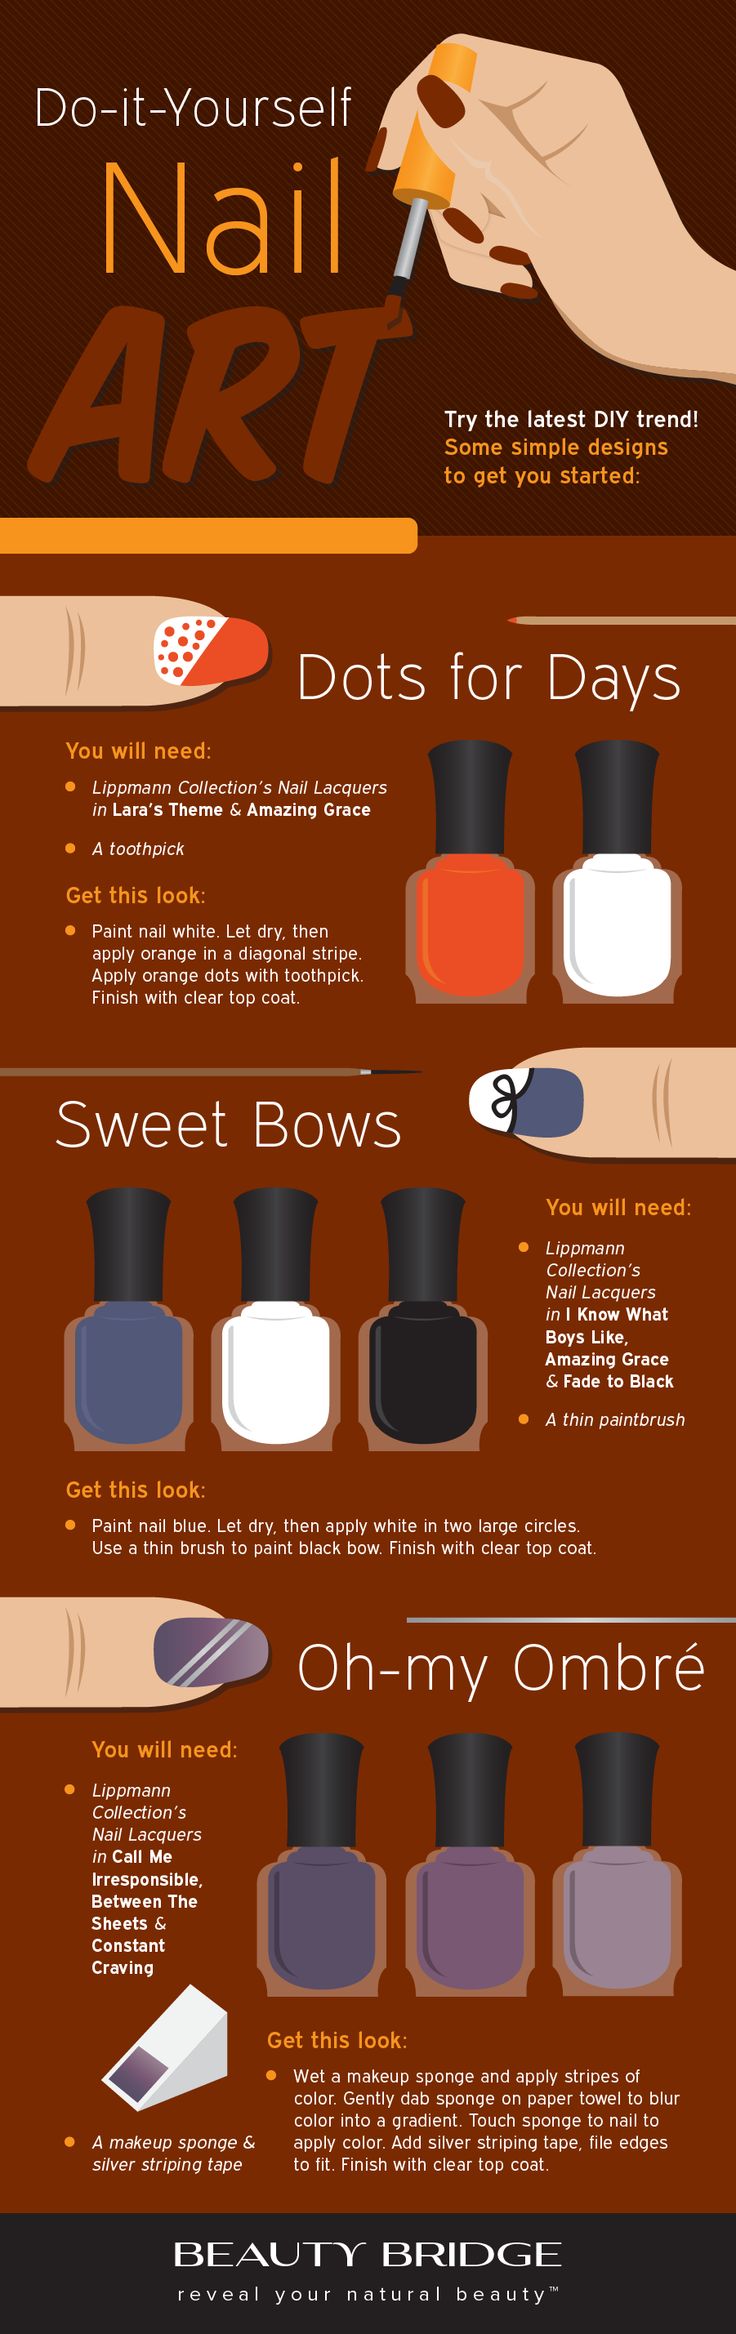 How to do nail art without tools infographic on blog page